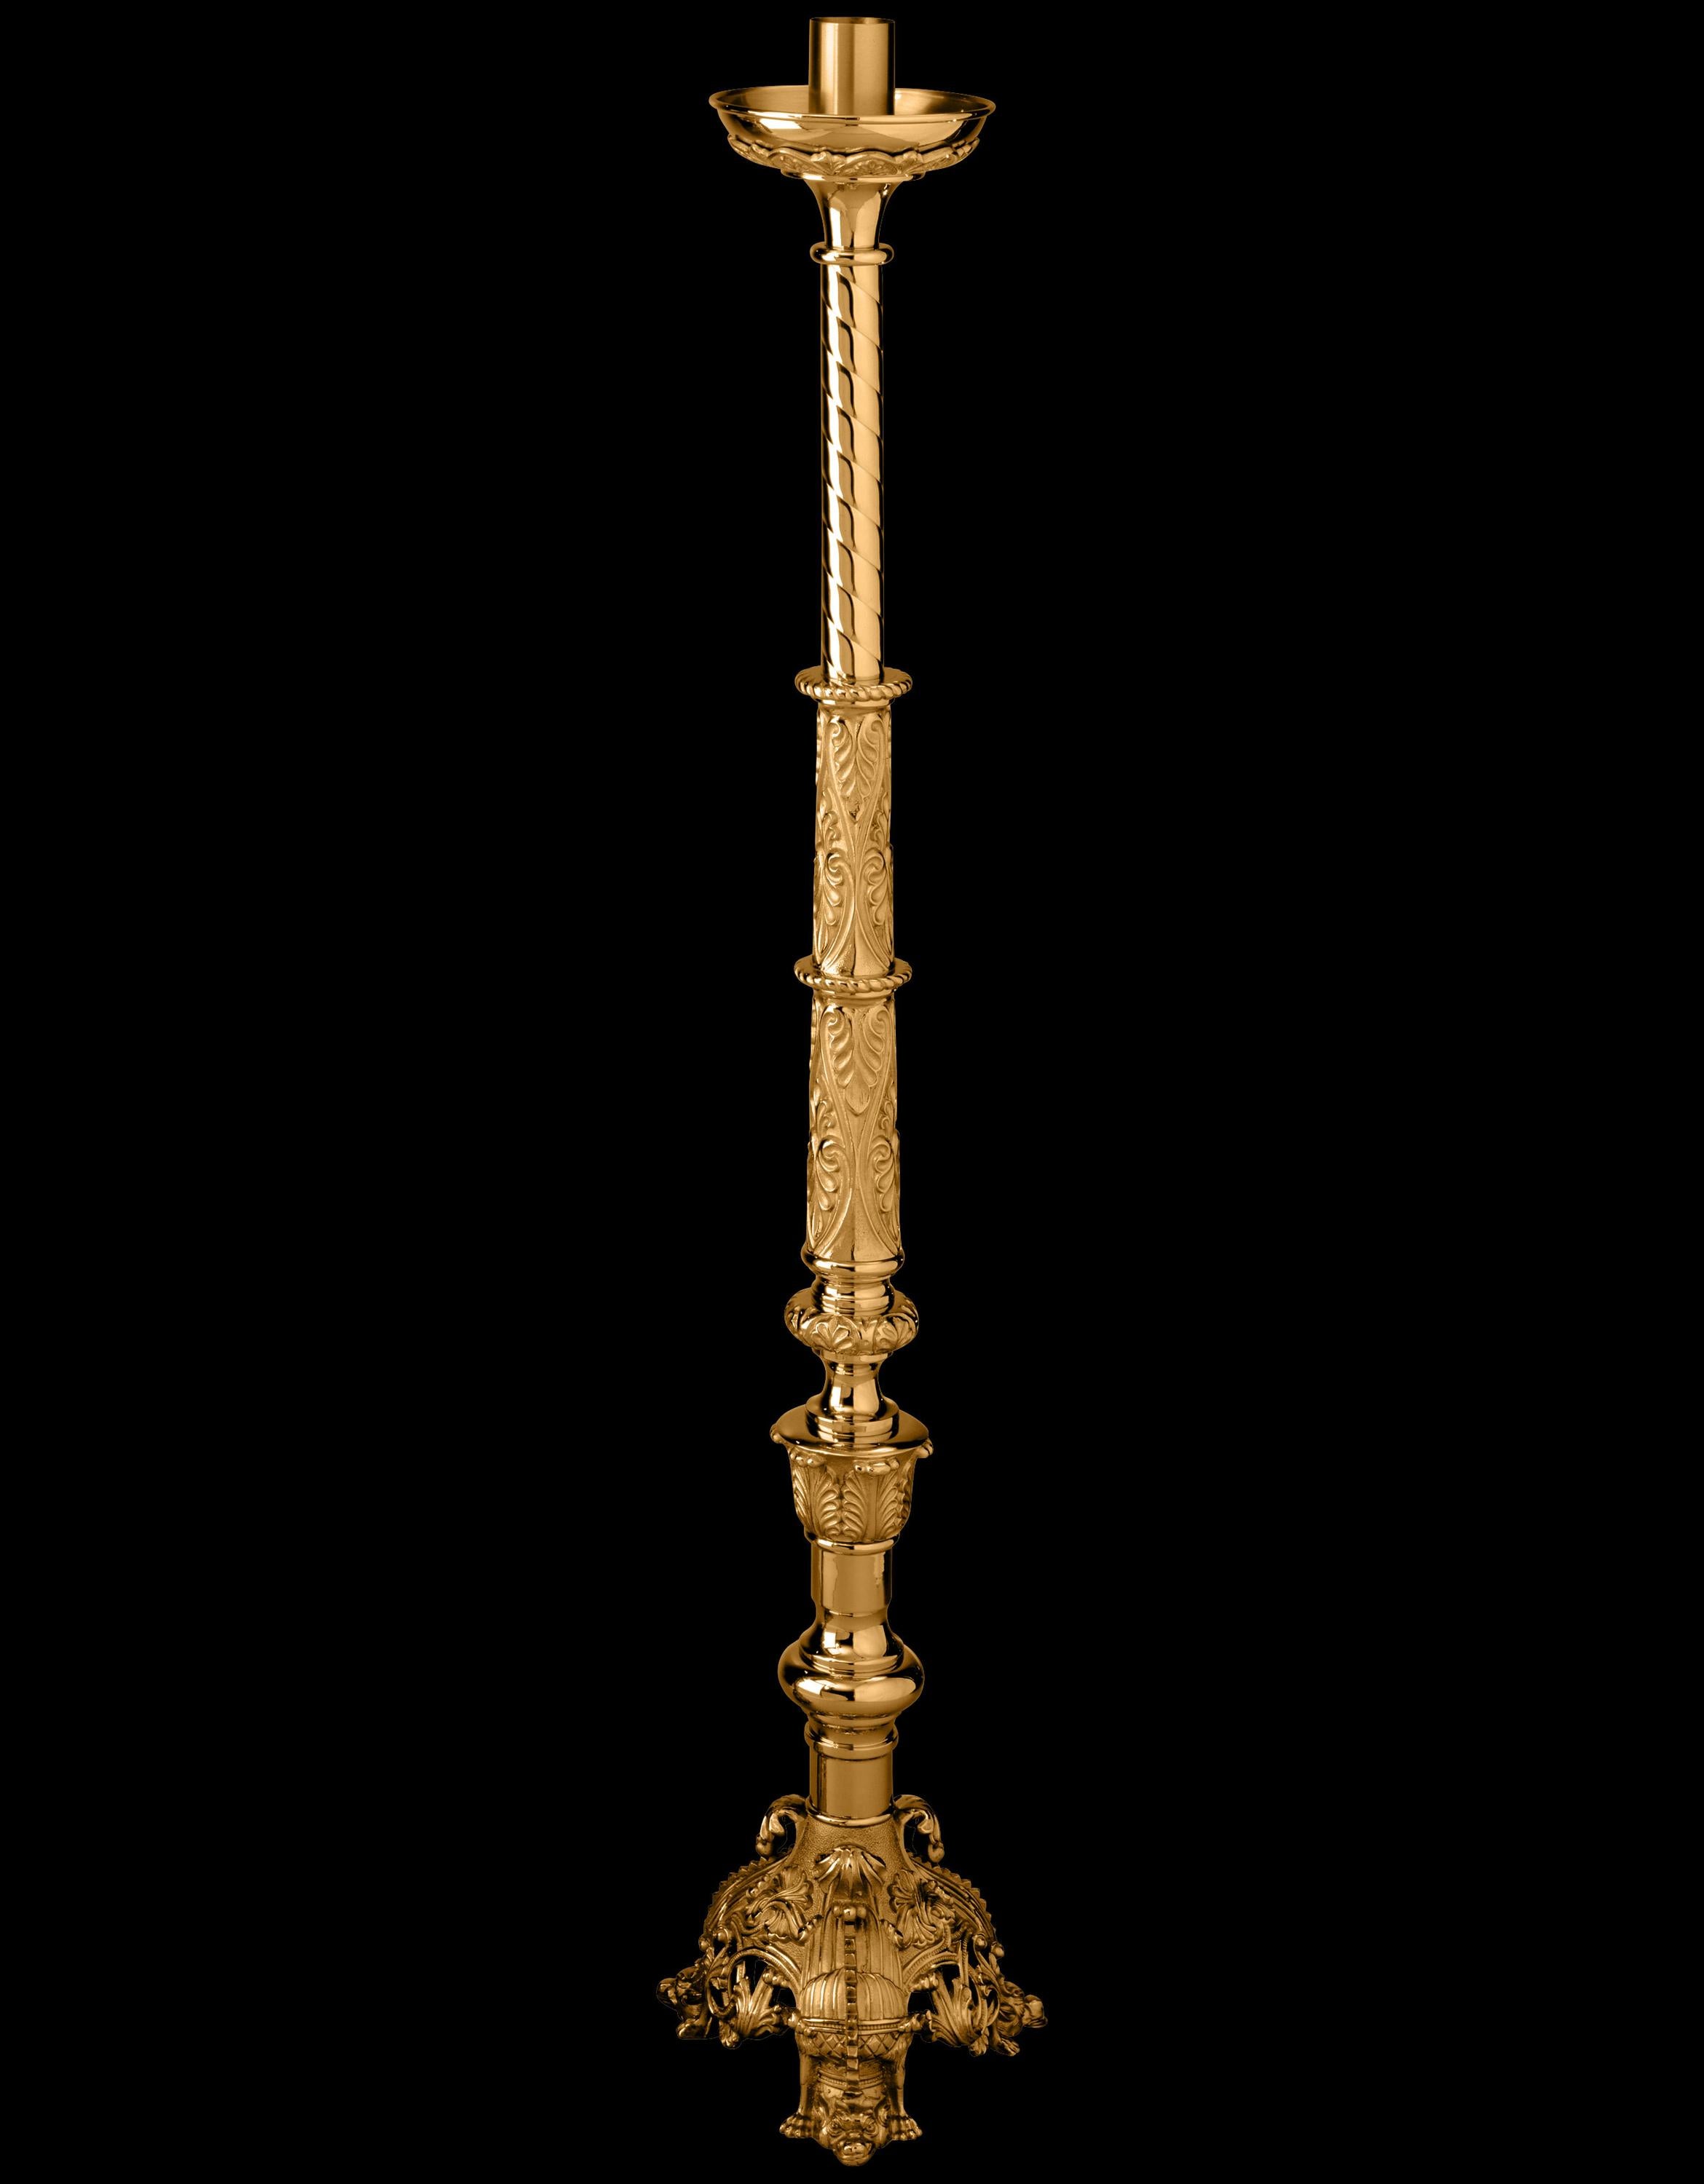 processional-torch-candlestick-389-206.jpg